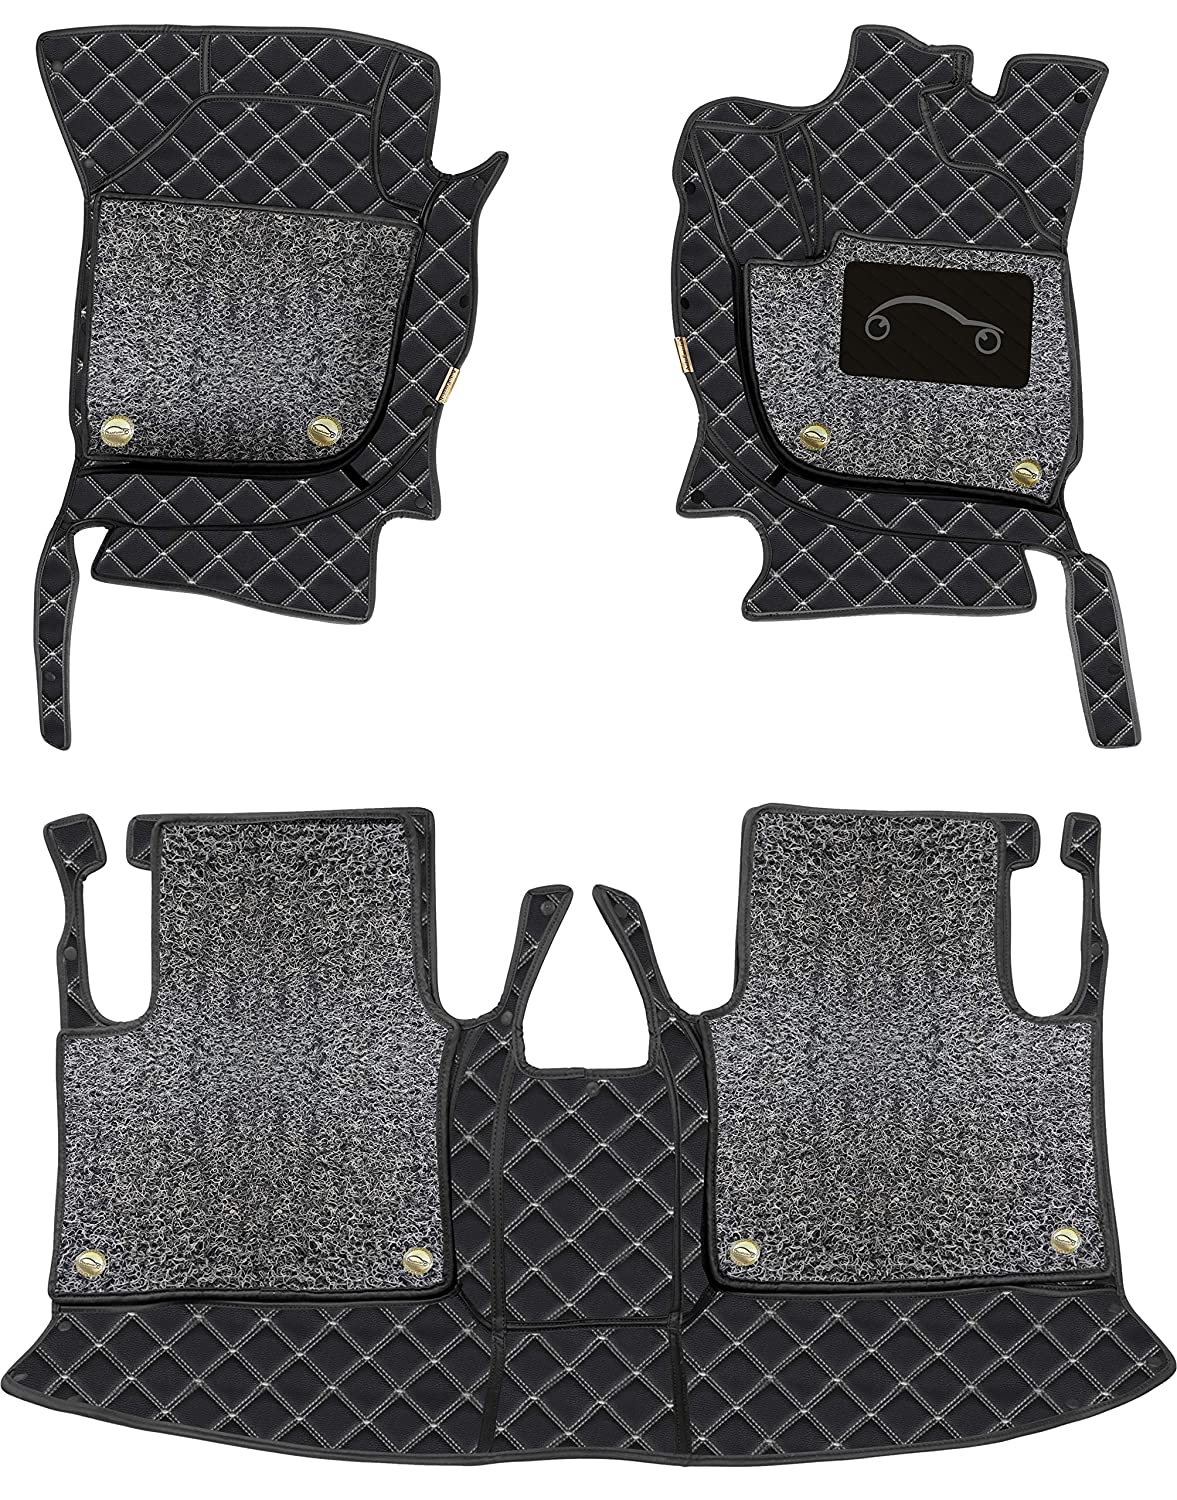 Land Rover Range Rover Evoque R-Dynamic 2020 7D Luxury Car Mat, All Weather Proof, Anti-Skid, 100% Waterproof & Odorless with Unique Diamond Fish Design (24mm Luxury PU Leather, 2 Rows)